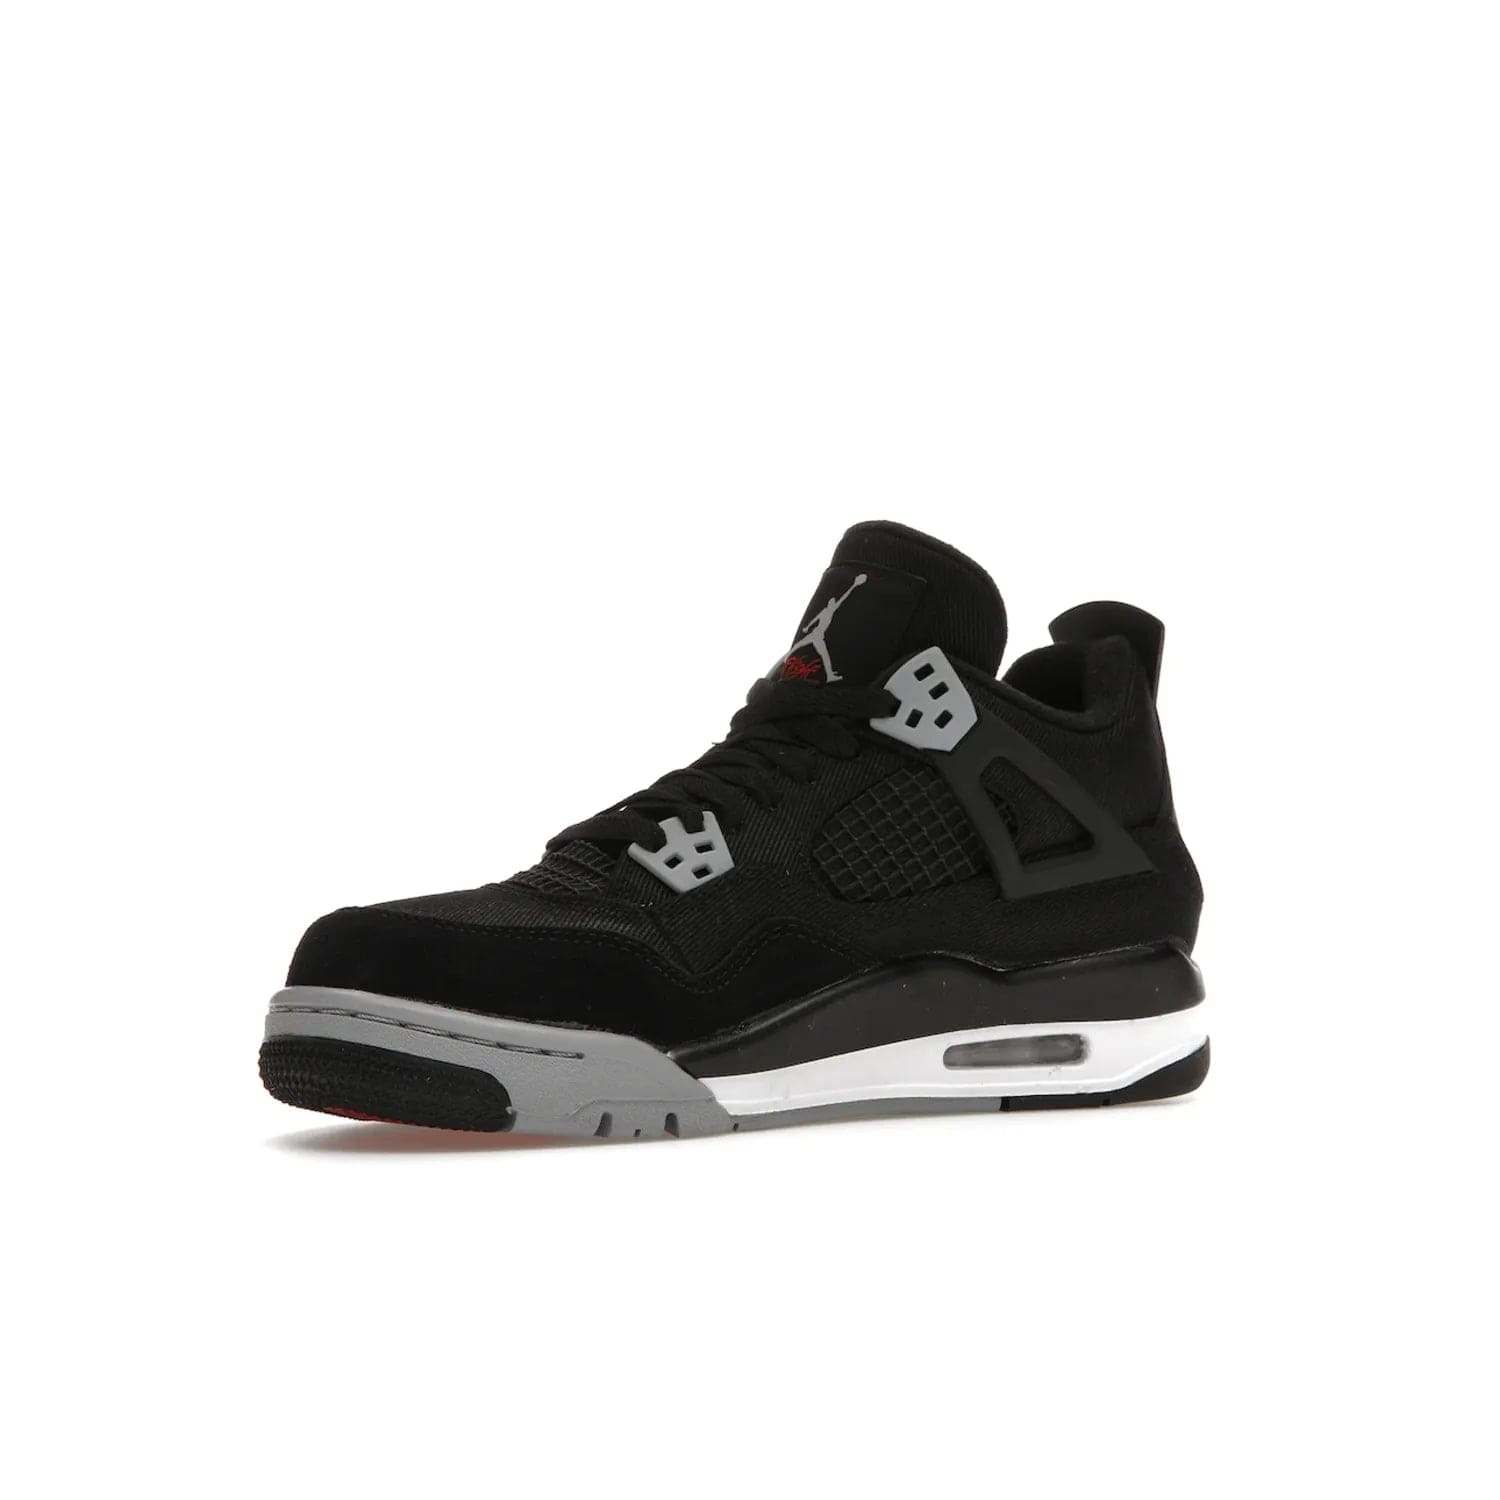 Jordan 4 Retro Black Canvas (GS) - Image 16 - Only at www.BallersClubKickz.com - Premium Air Jordan 4 Retro Black Canvas in grade-schooler's catalog. Featuring black suede canvas upper, grey molding, accents in red, white midsole, woven Jumpman tag, & visible AIR cushioning. Releasing Oct. 1, 2022.